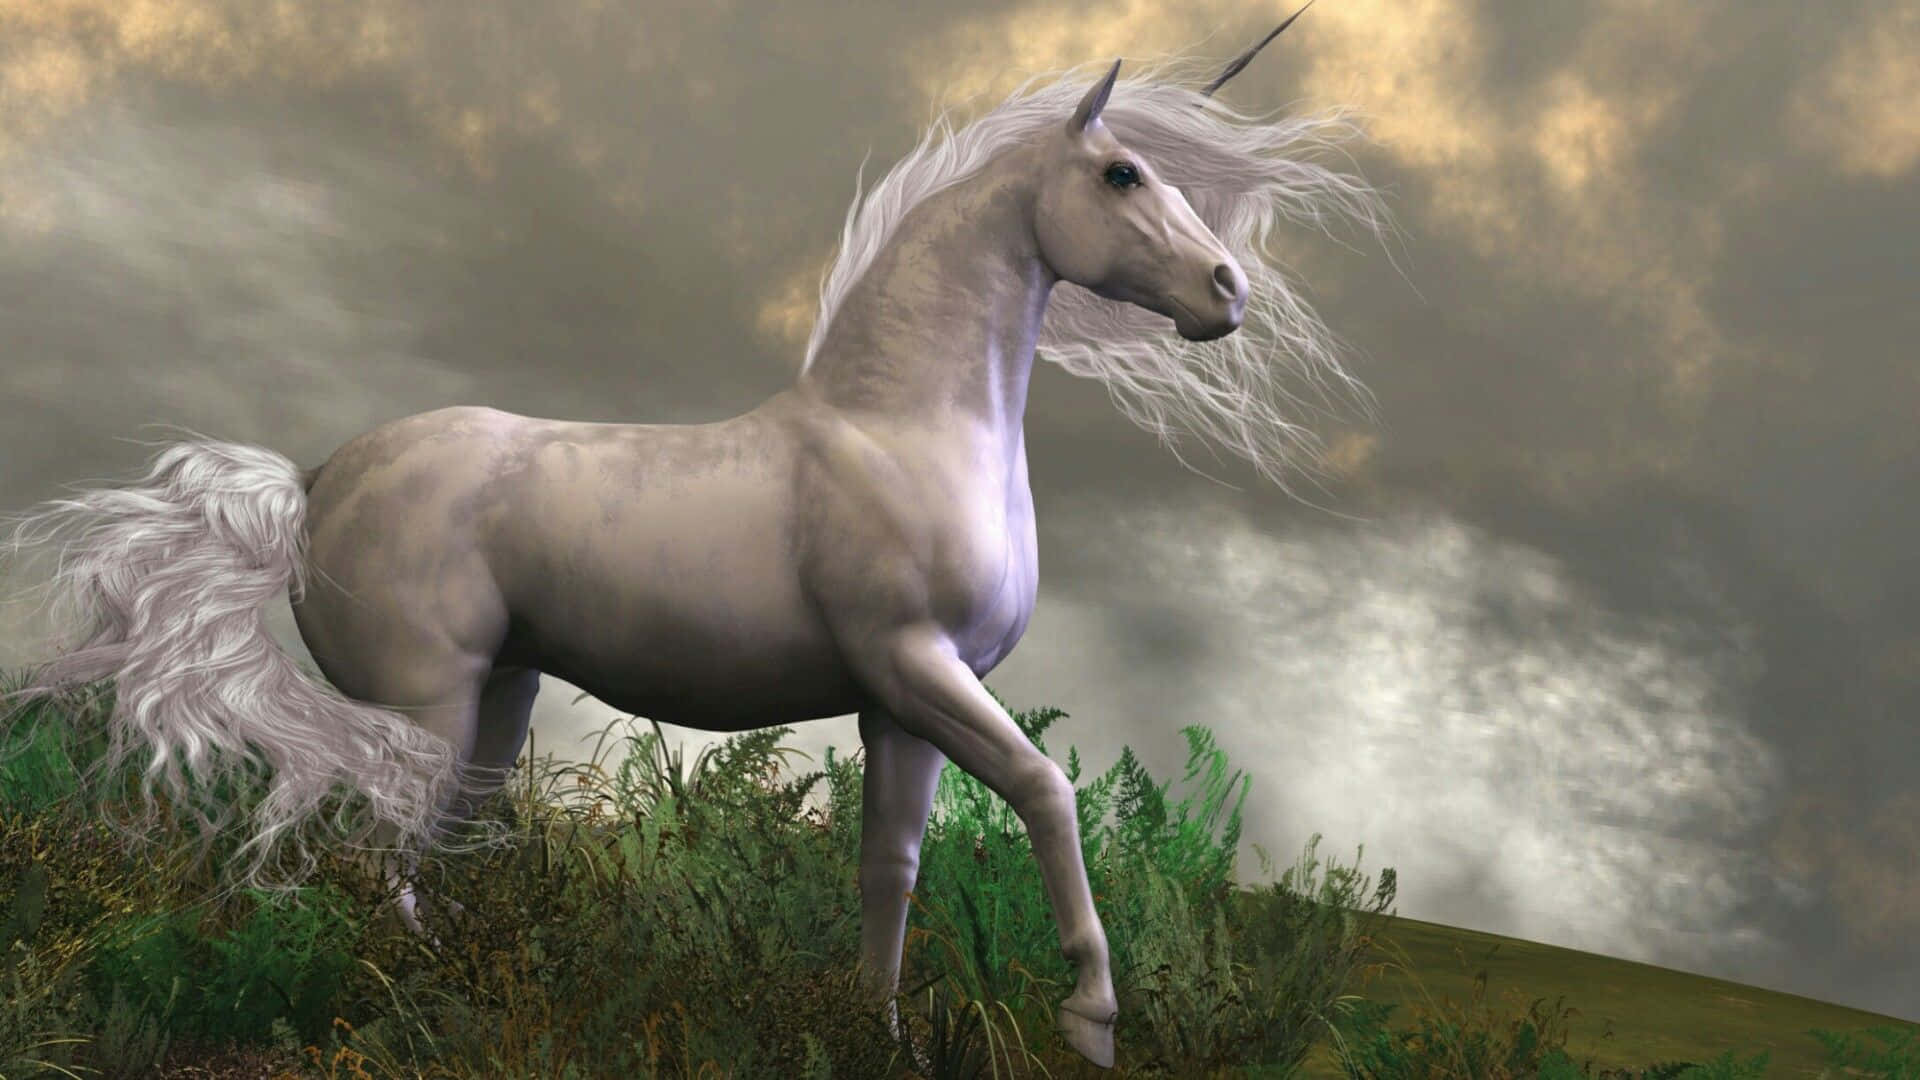 A mythical white unicorn trots gently in the dark forest Wallpaper